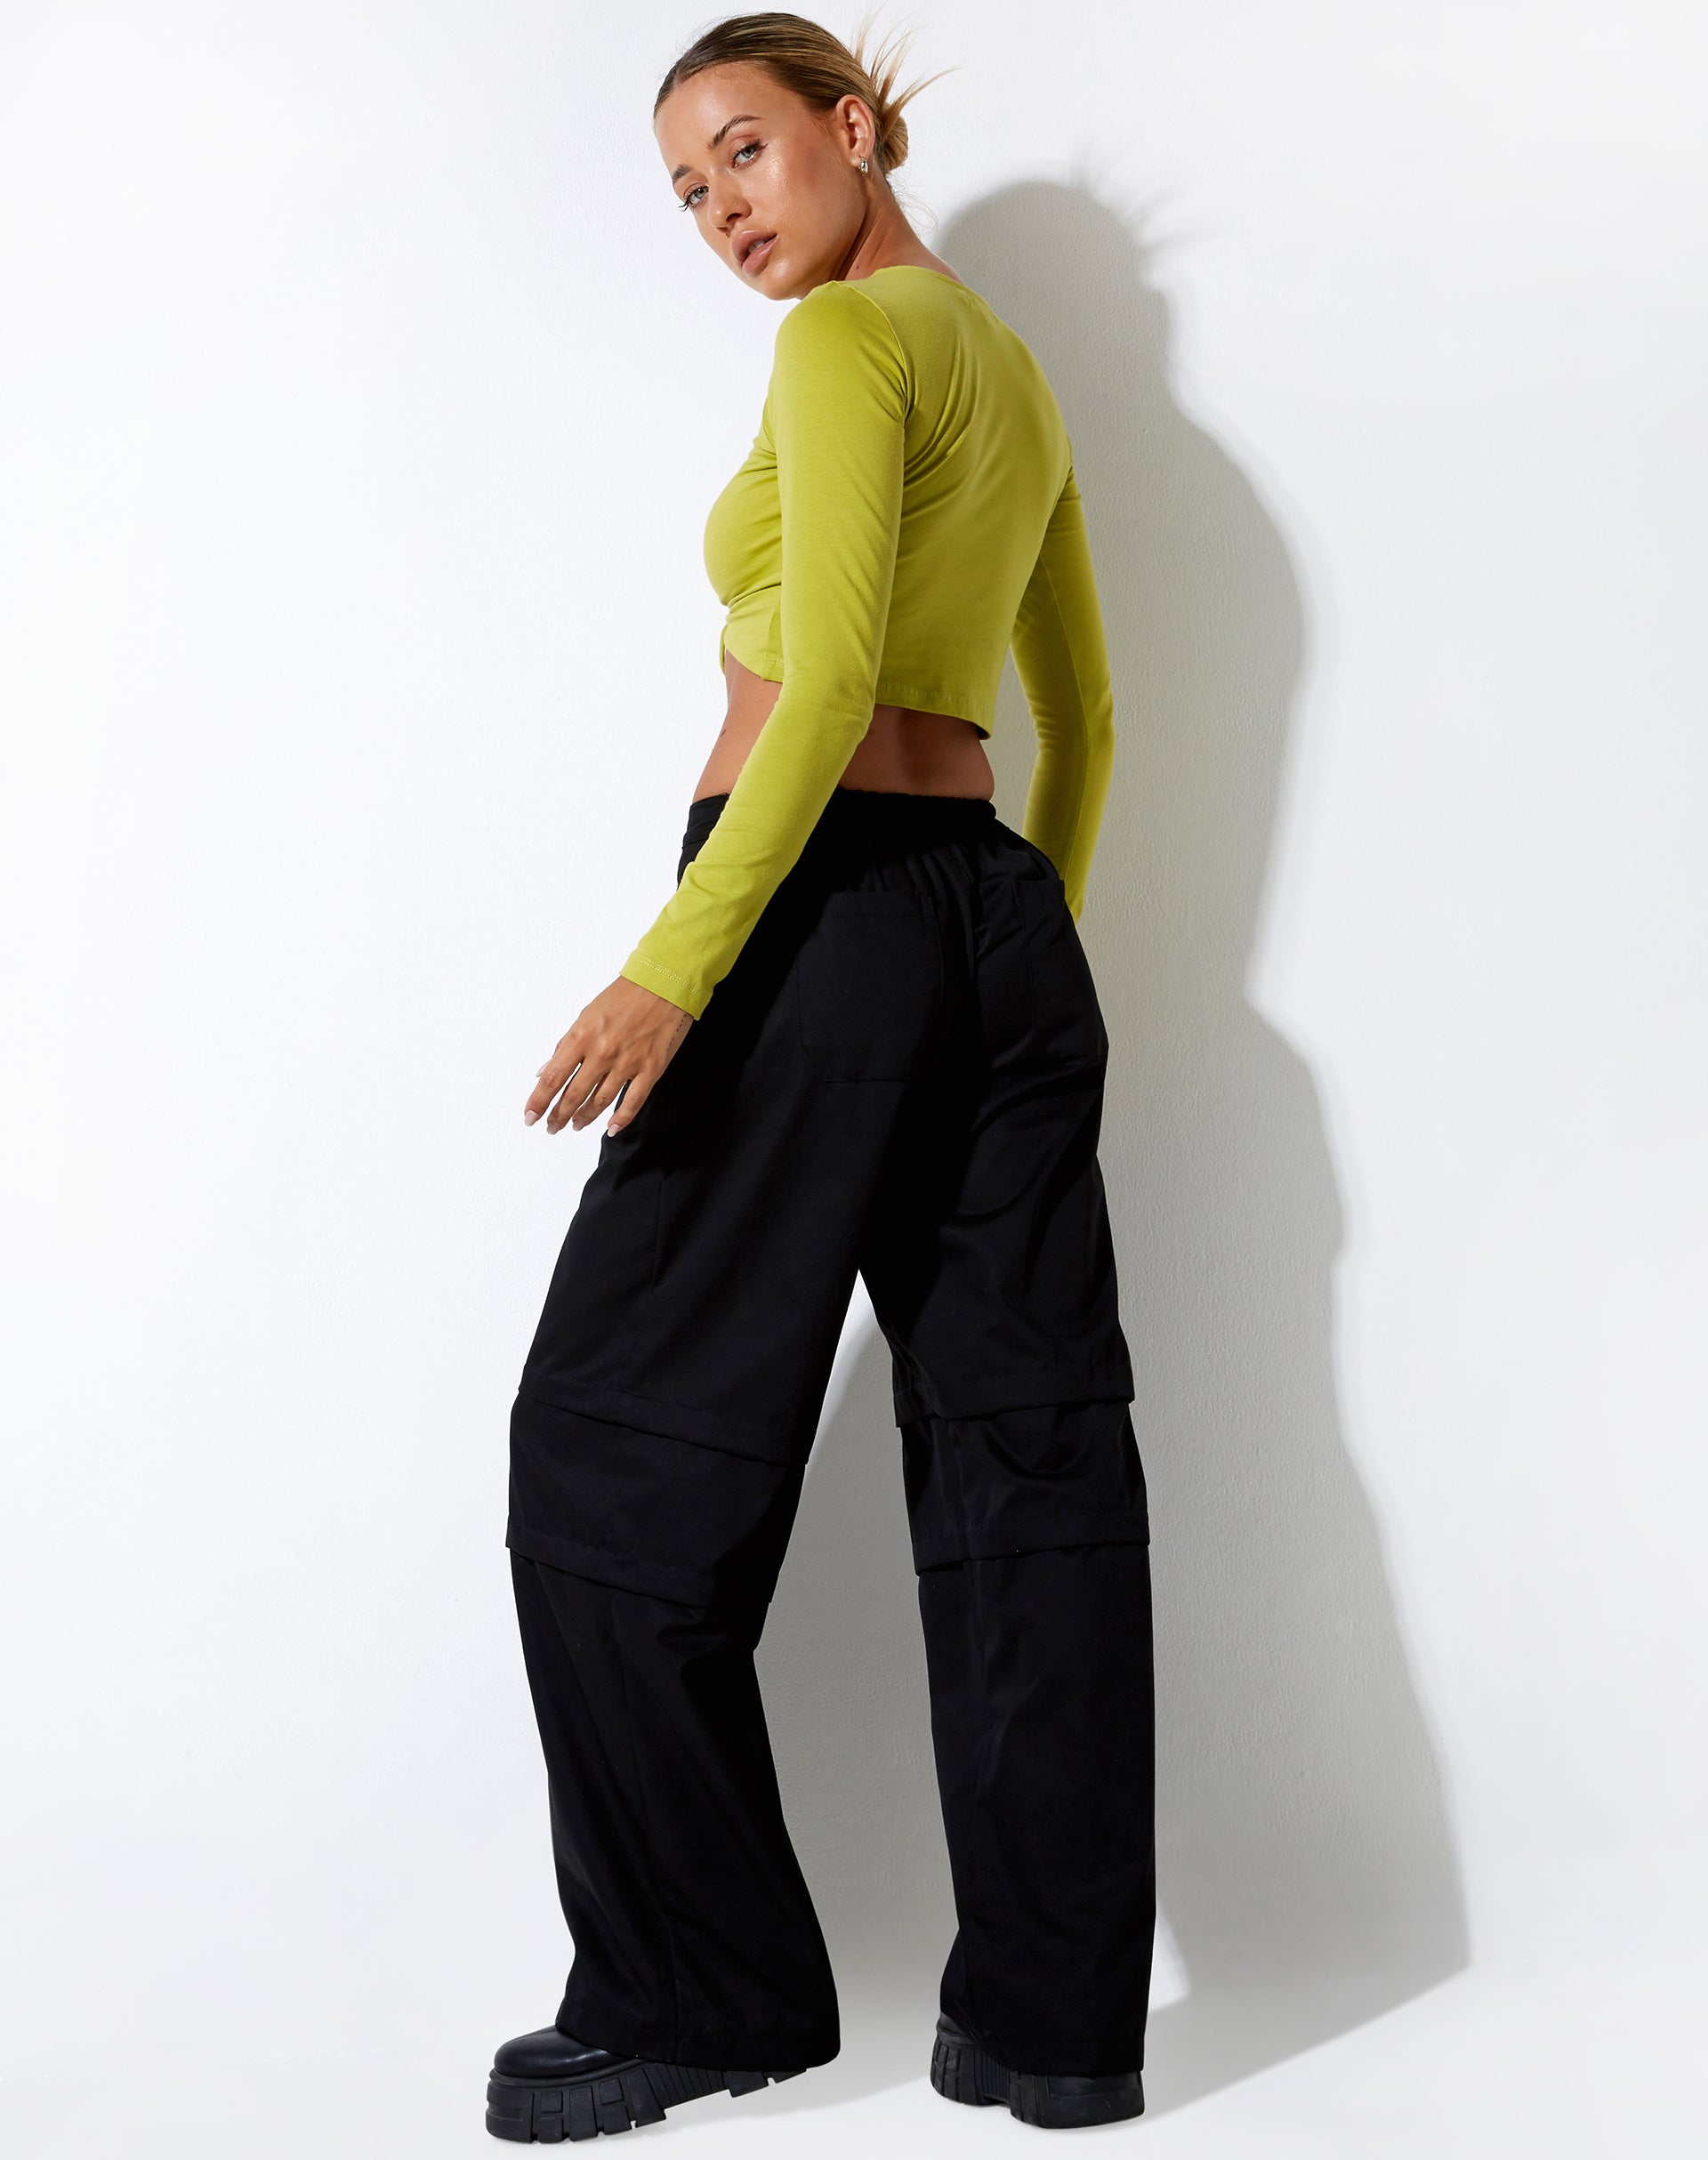 image of Gisy Crop Top in Lycra Lime